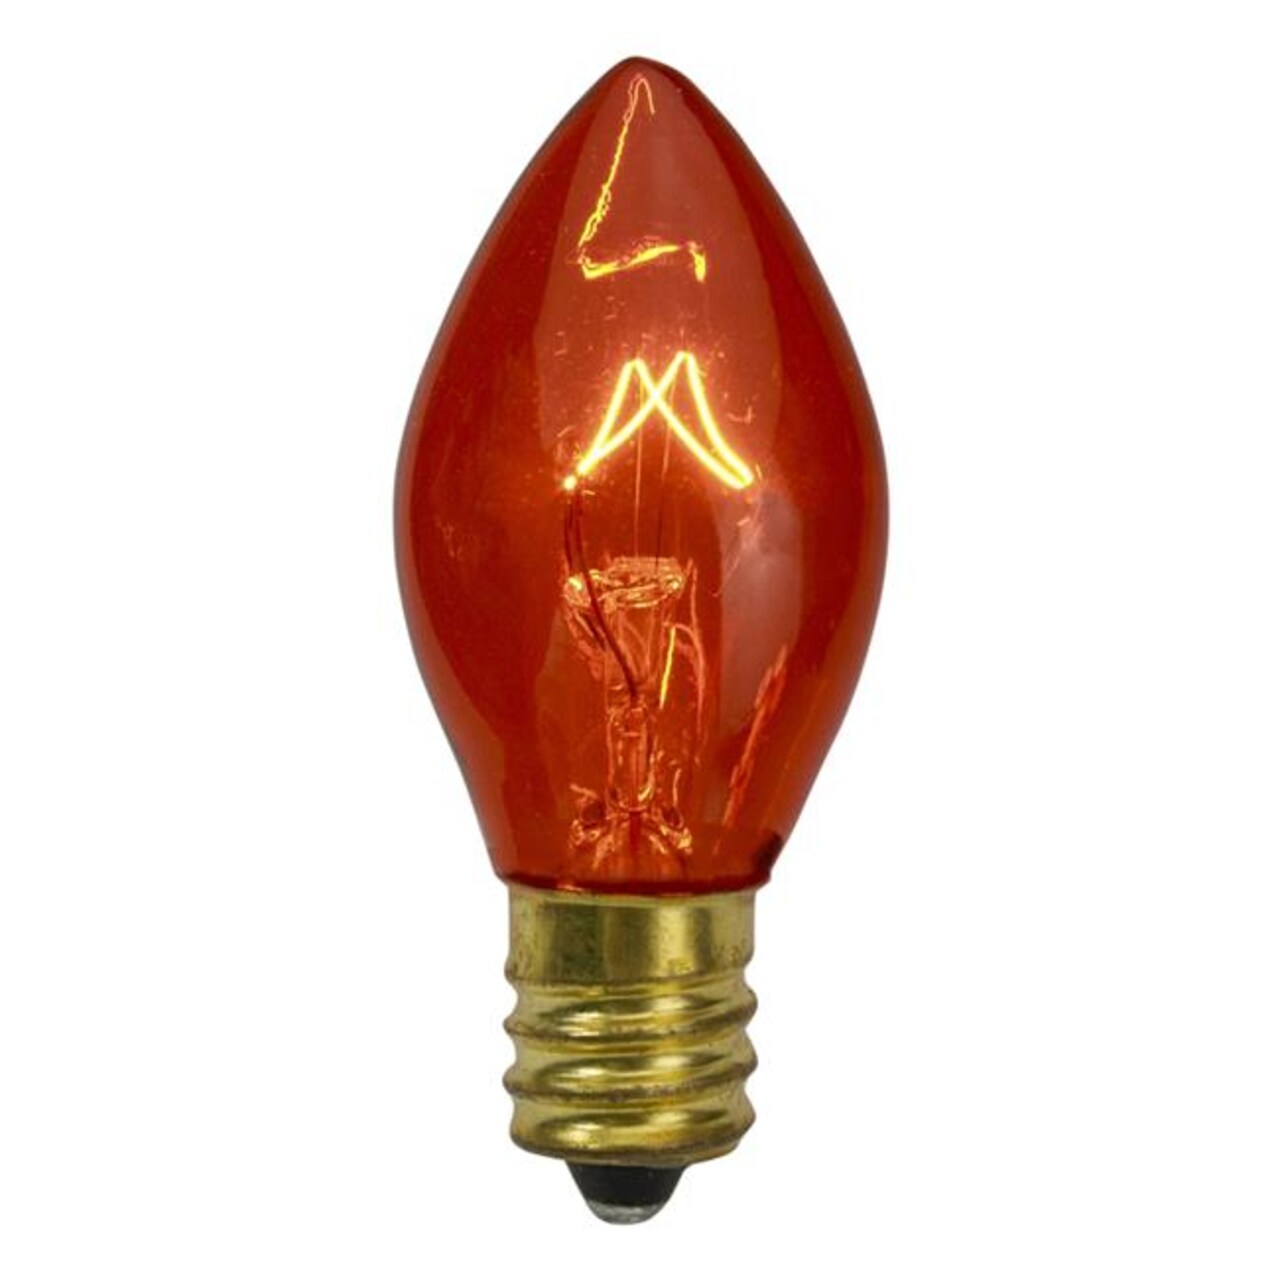 NorthLight 34316490 2 x 1 in. Dia. C7 Transparent Christmas Replacement Bulbs, Amber - Pack of 4